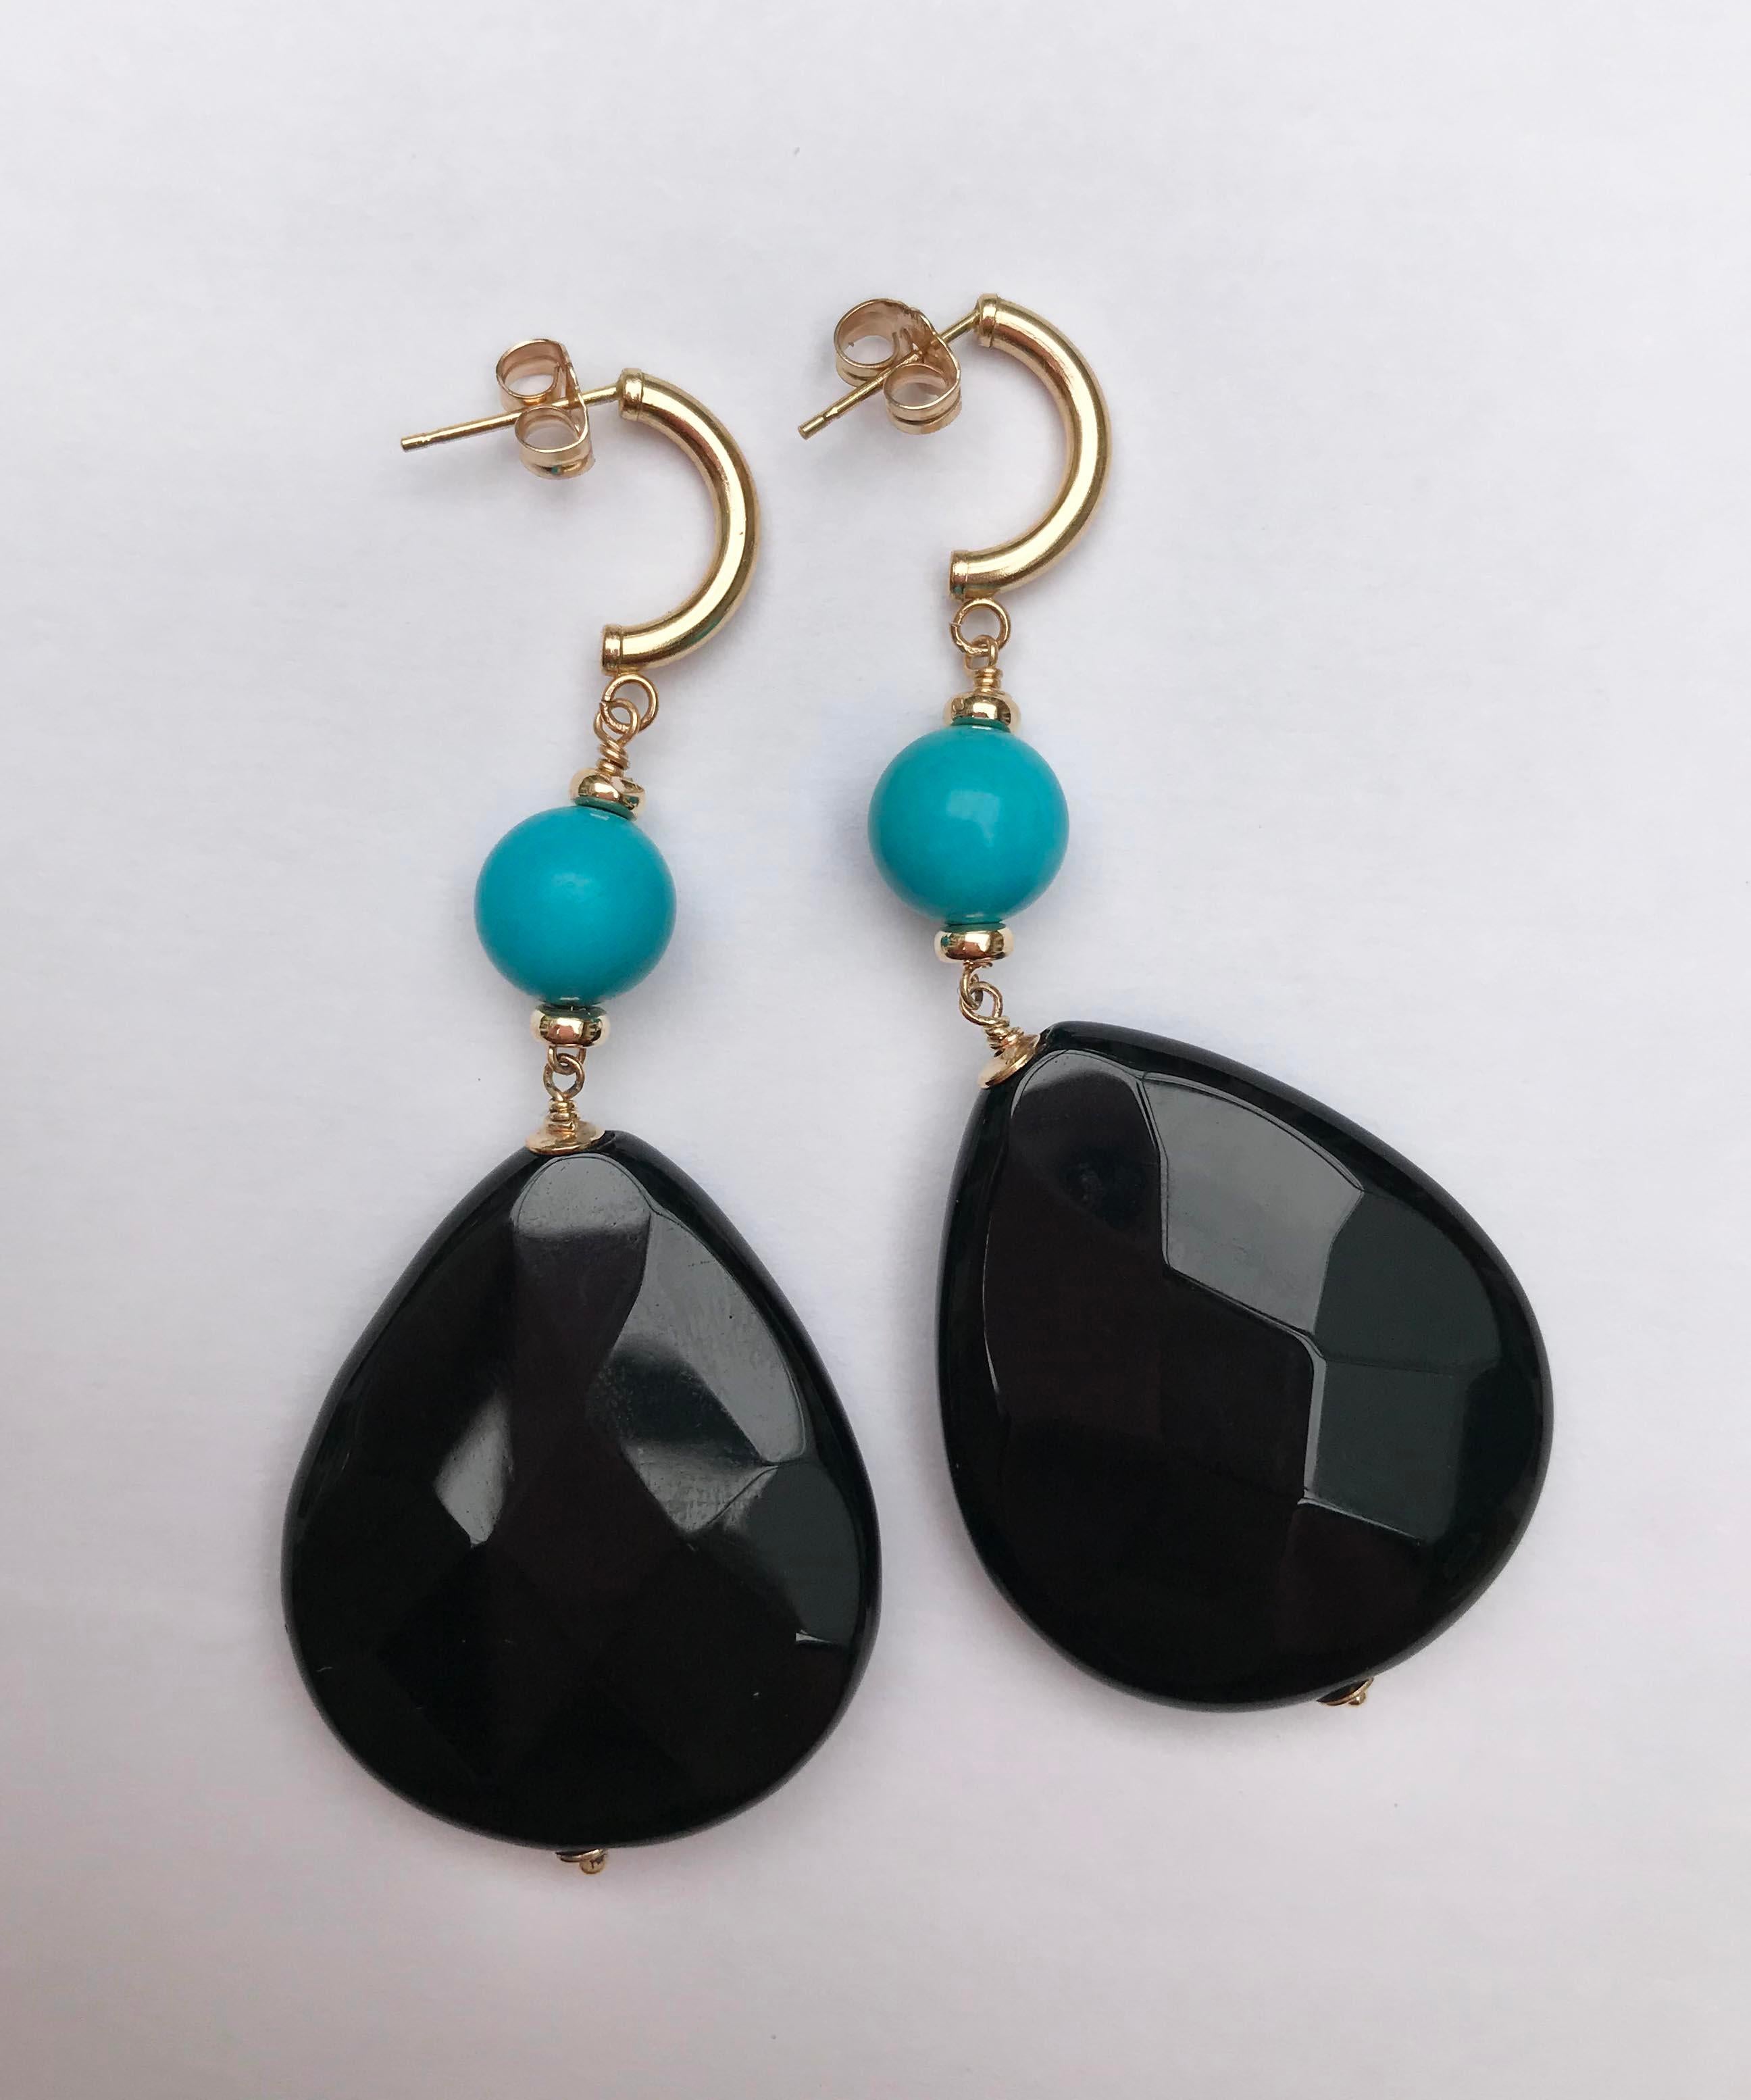 Artist Marina J Turquoise and Onyx Earrings with 14 Karat Yellow Gold ear Studs